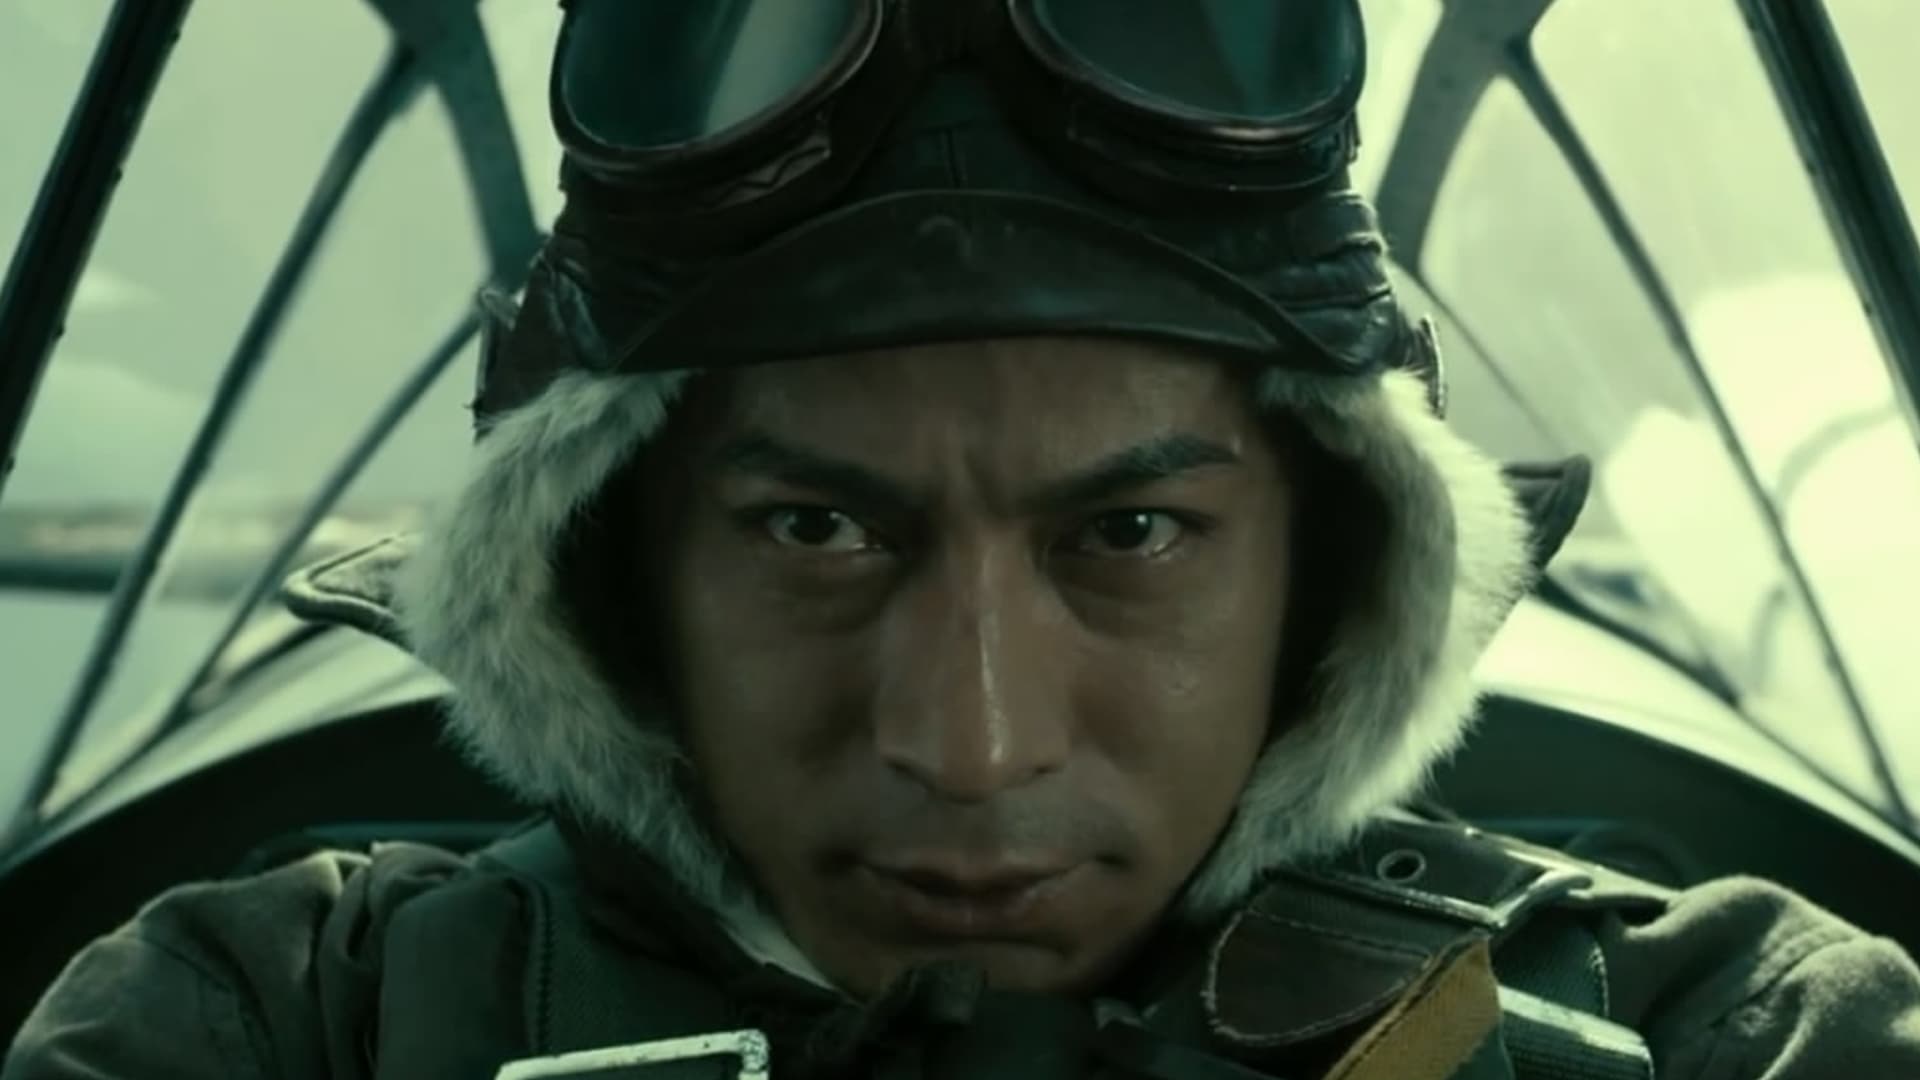 The Fighter Pilot 2013 123movies